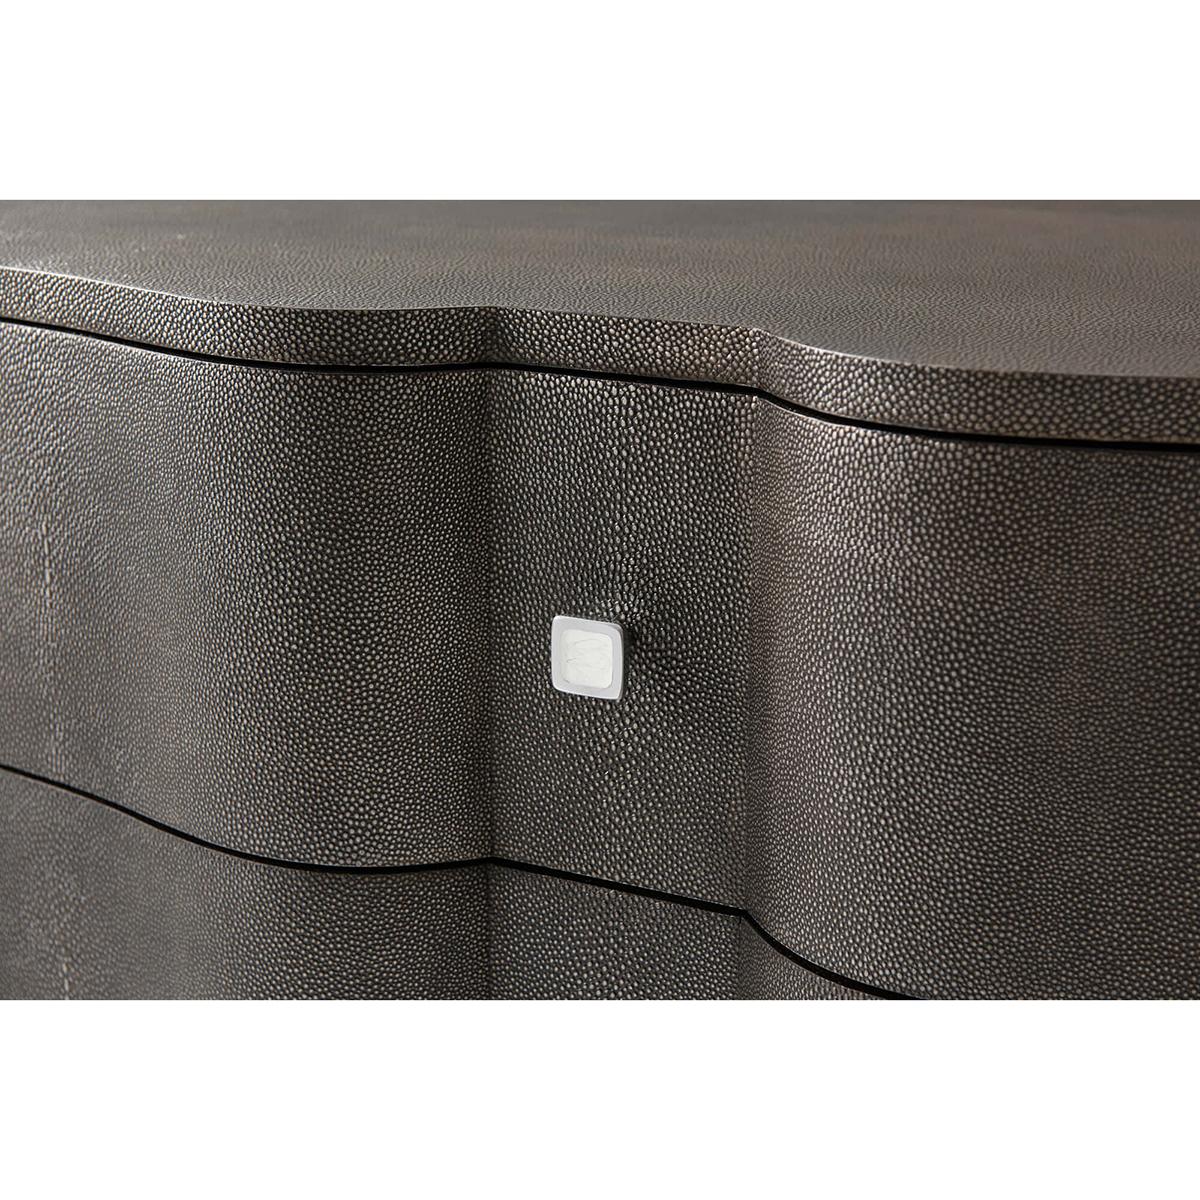 Contemporary Modern Serpentine Leather Wrapped Nightstand - Dark For Sale